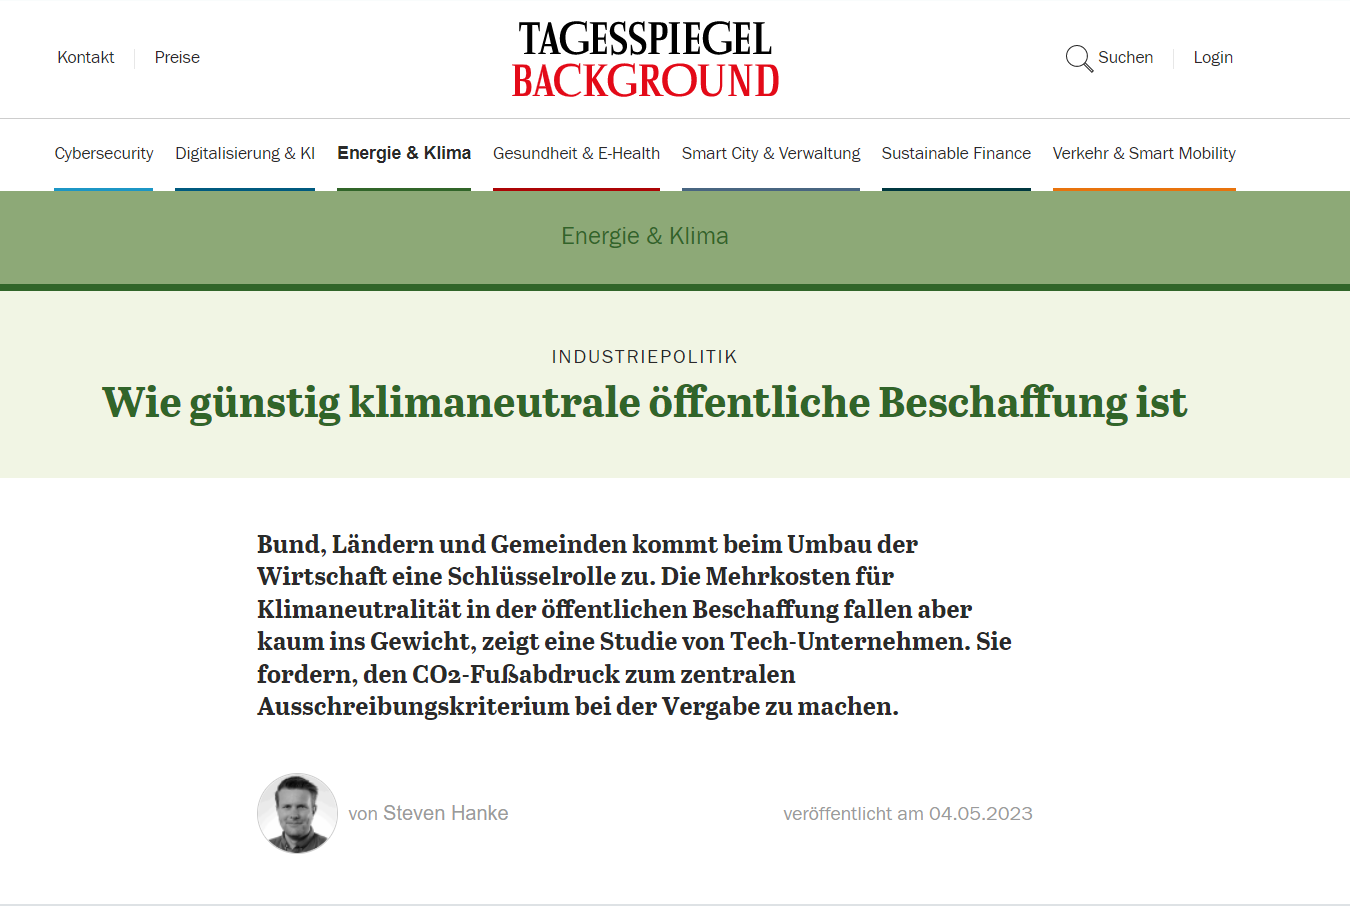 Tagesspiegel Background Energie & Klima reports on our work on climate-neutral public procurement